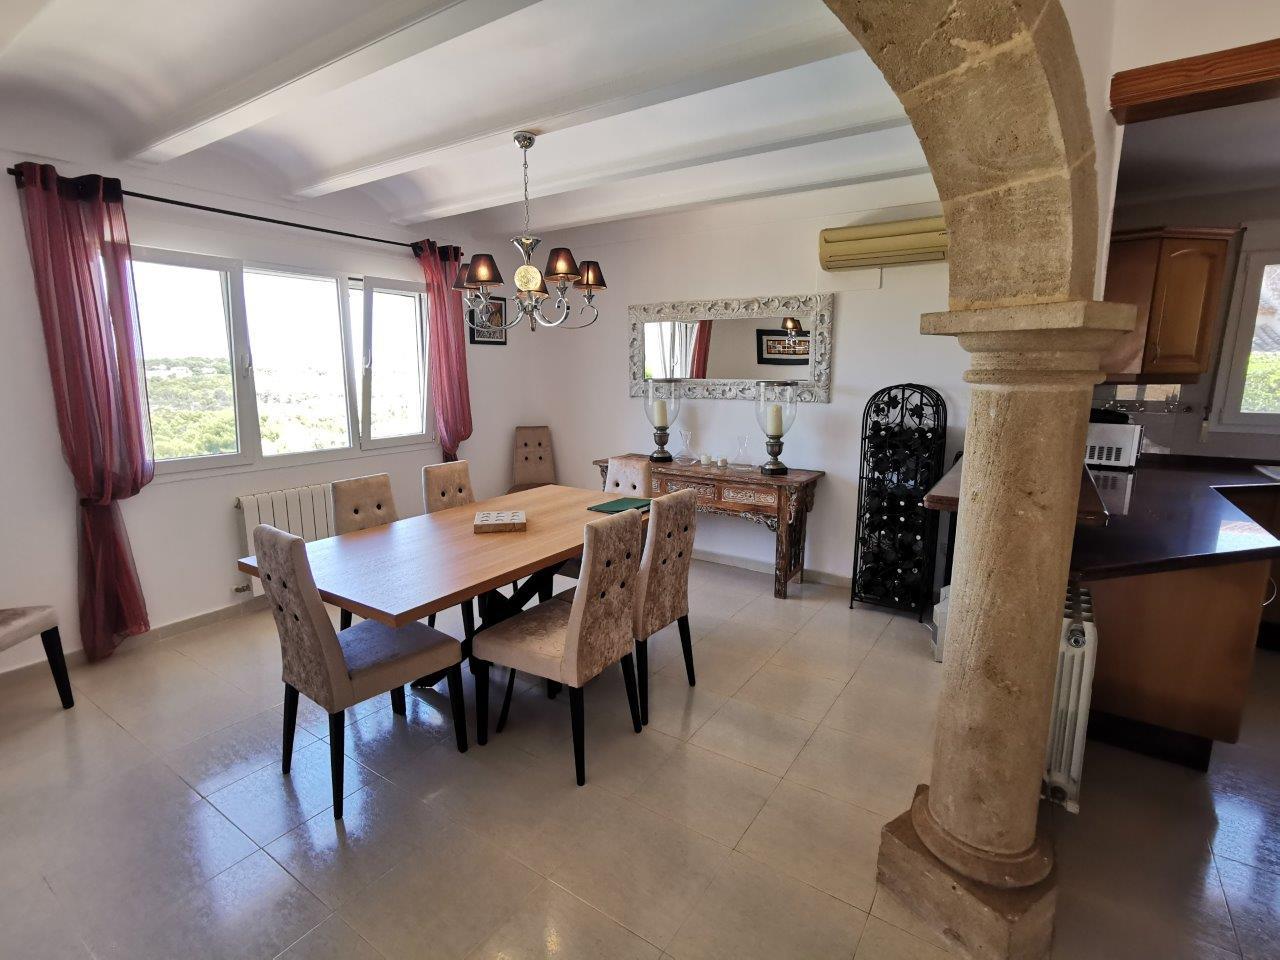 5 Bed villa for sale on Granadella natural park with stunning views for sale